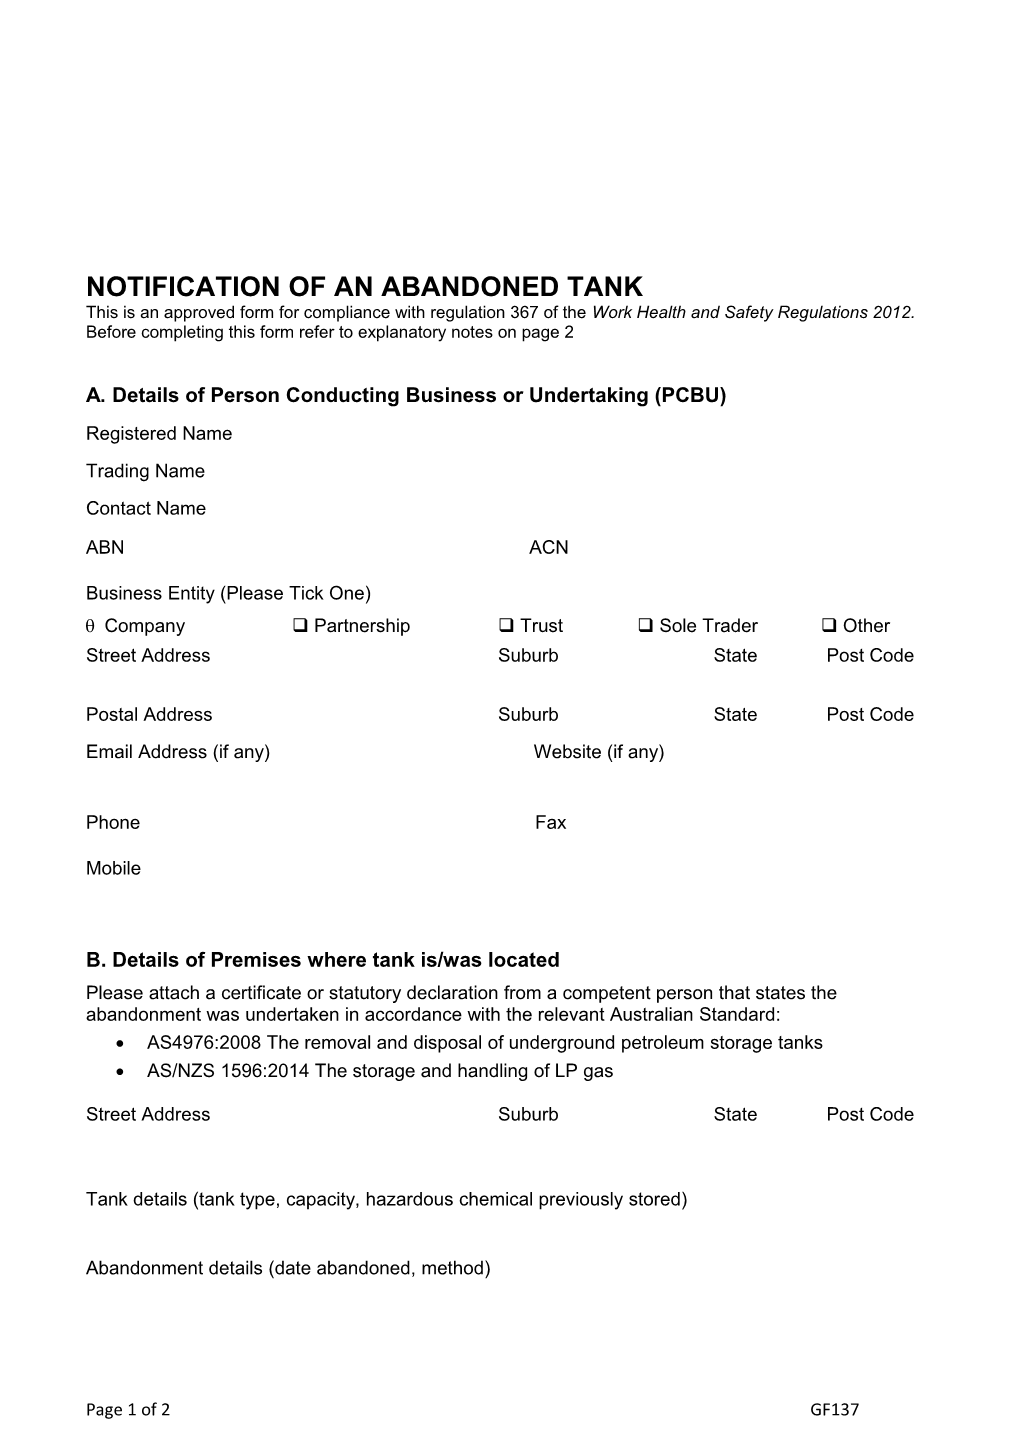 Notification of an Abandoned Tank